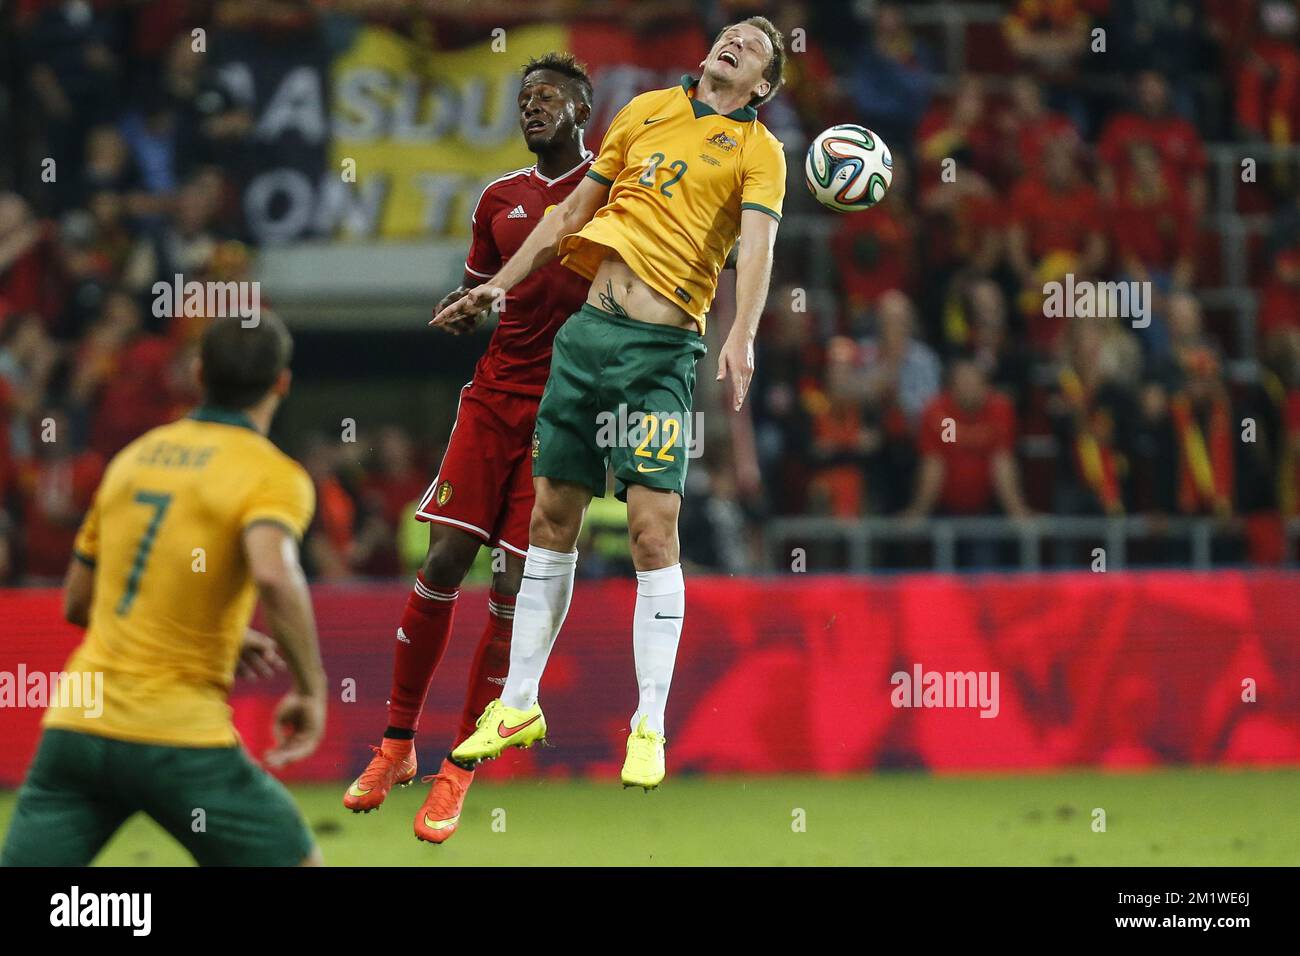 20140904 - BRUSSELS, BELGIUM: Belgium's Divock Origi and Australia's Alex Wilkinson pictured in action during a friendly game between Belgian national soccer team Red Devils and Australian national soccer team Socceroos, Thursday 04 September 2014, in Brussels. BELGA PHOTO THIERRY ROGE Stock Photo